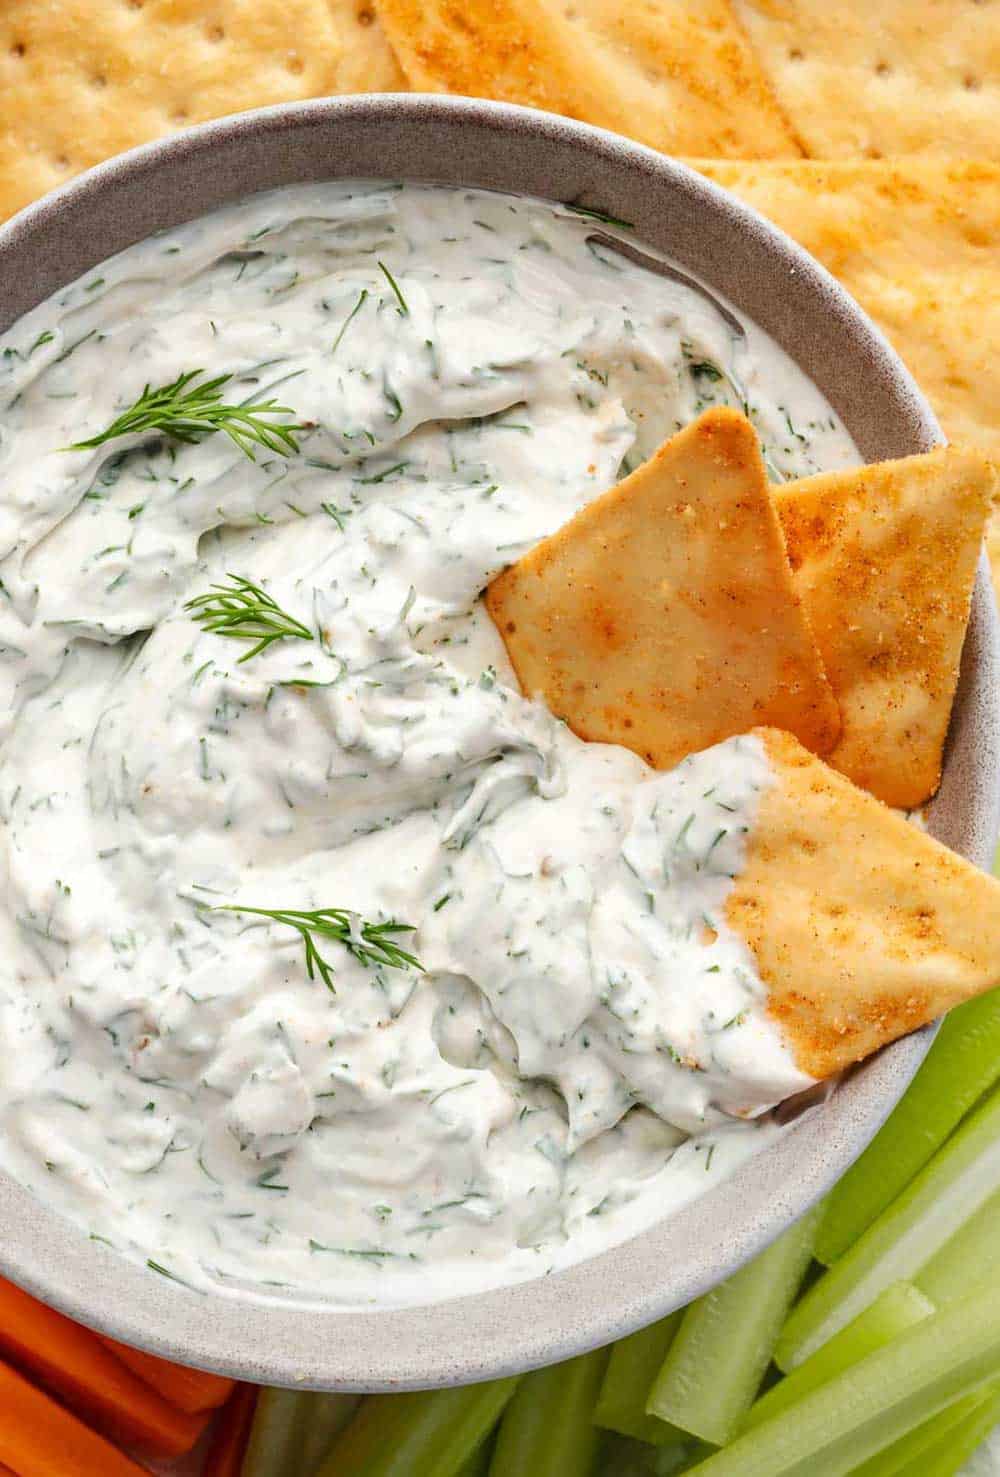 A bowl of creamy dill dip sits at the center, surrounded by an assortment of fresh vegetables, crispy crackers, and golden pita bread chips.